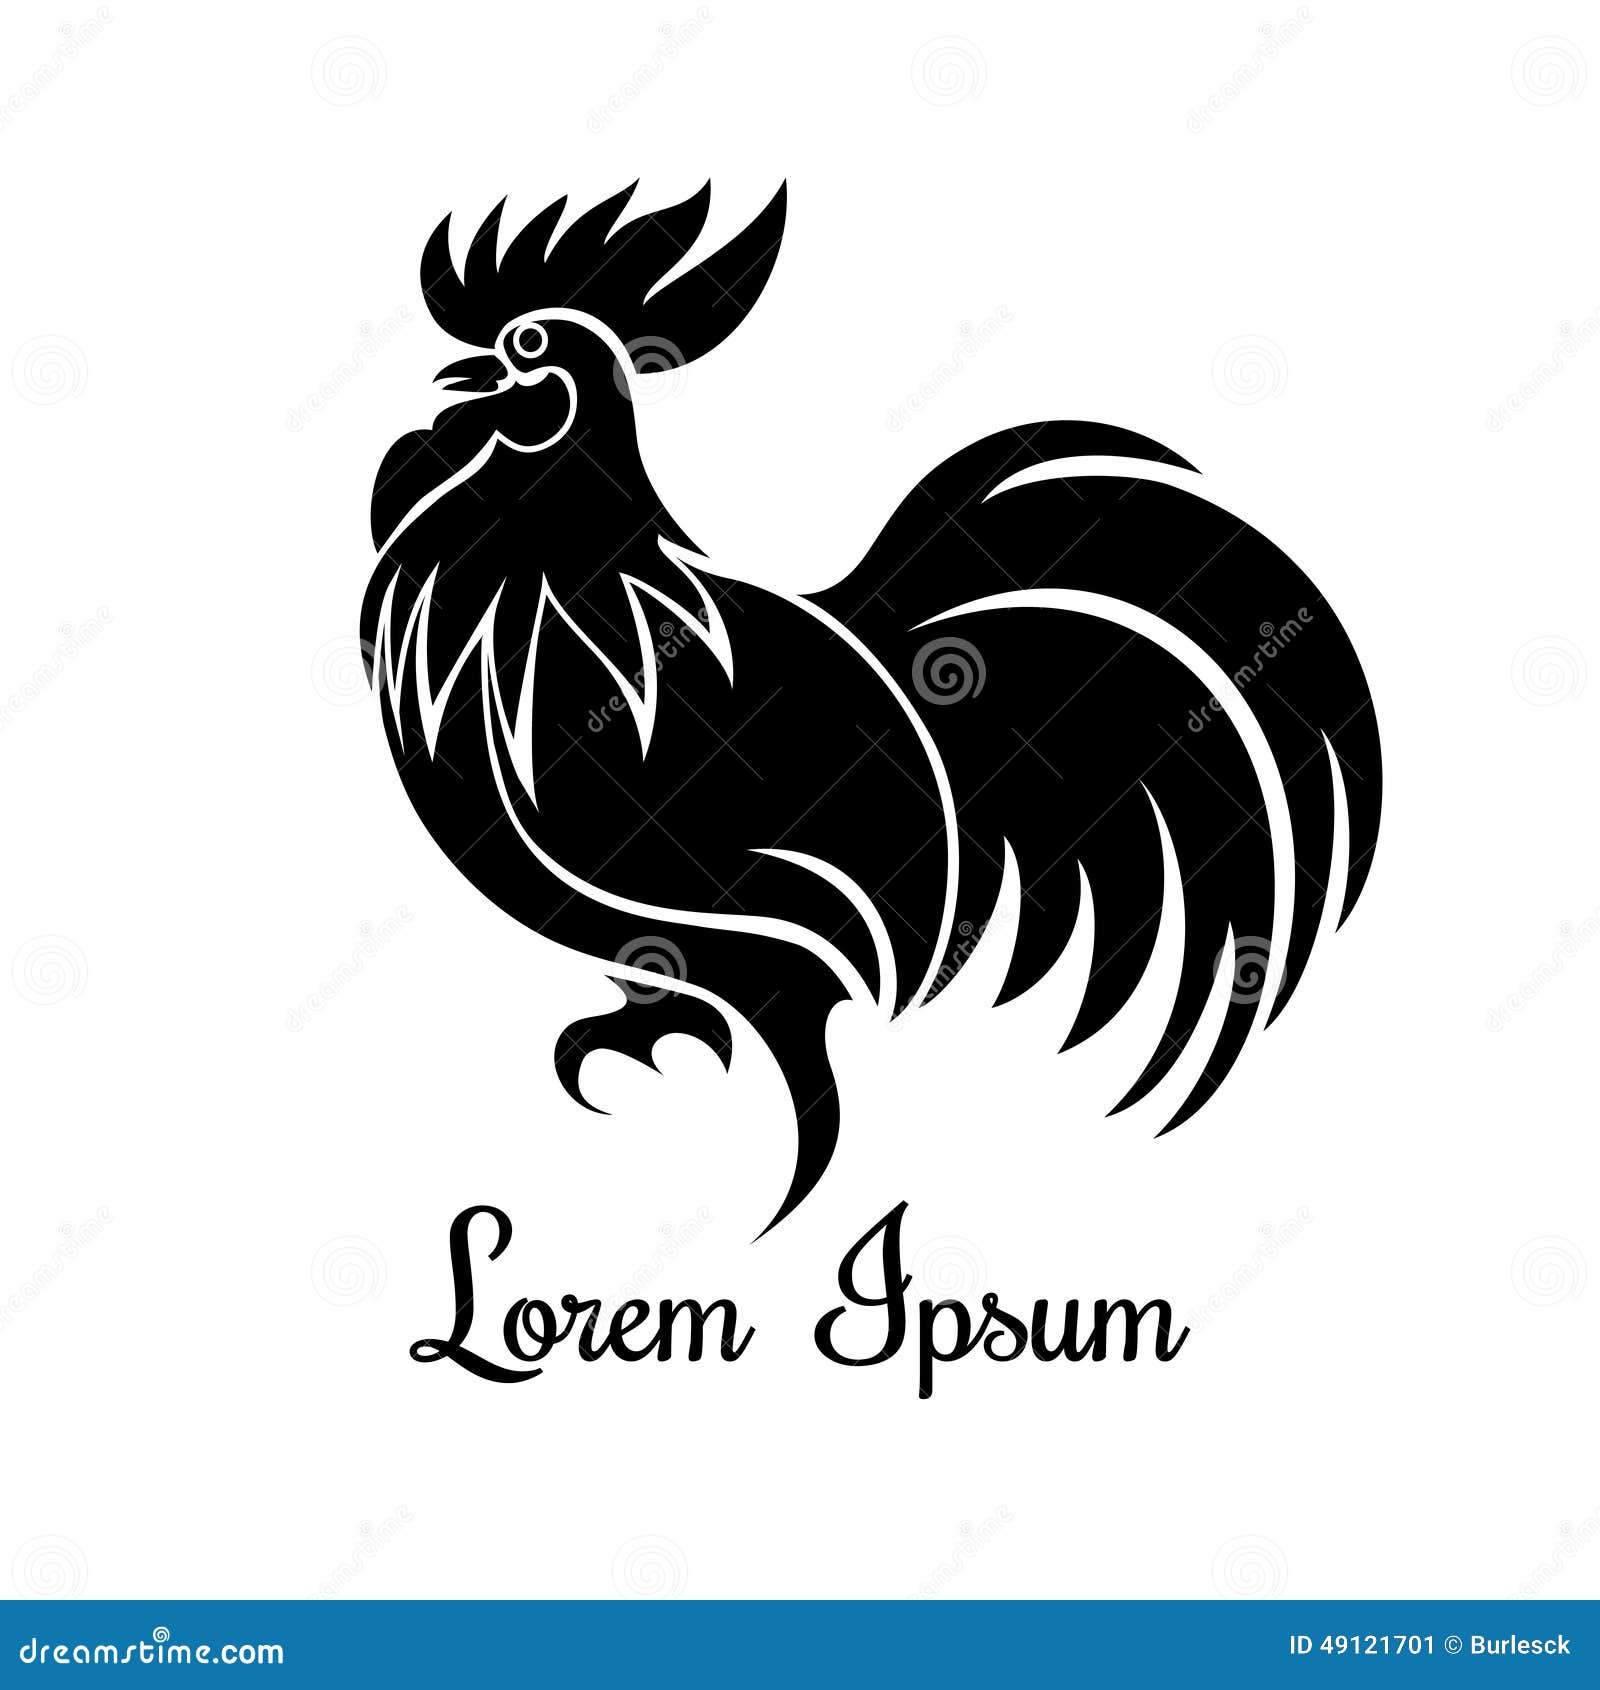 rooster logo clip art - photo #38